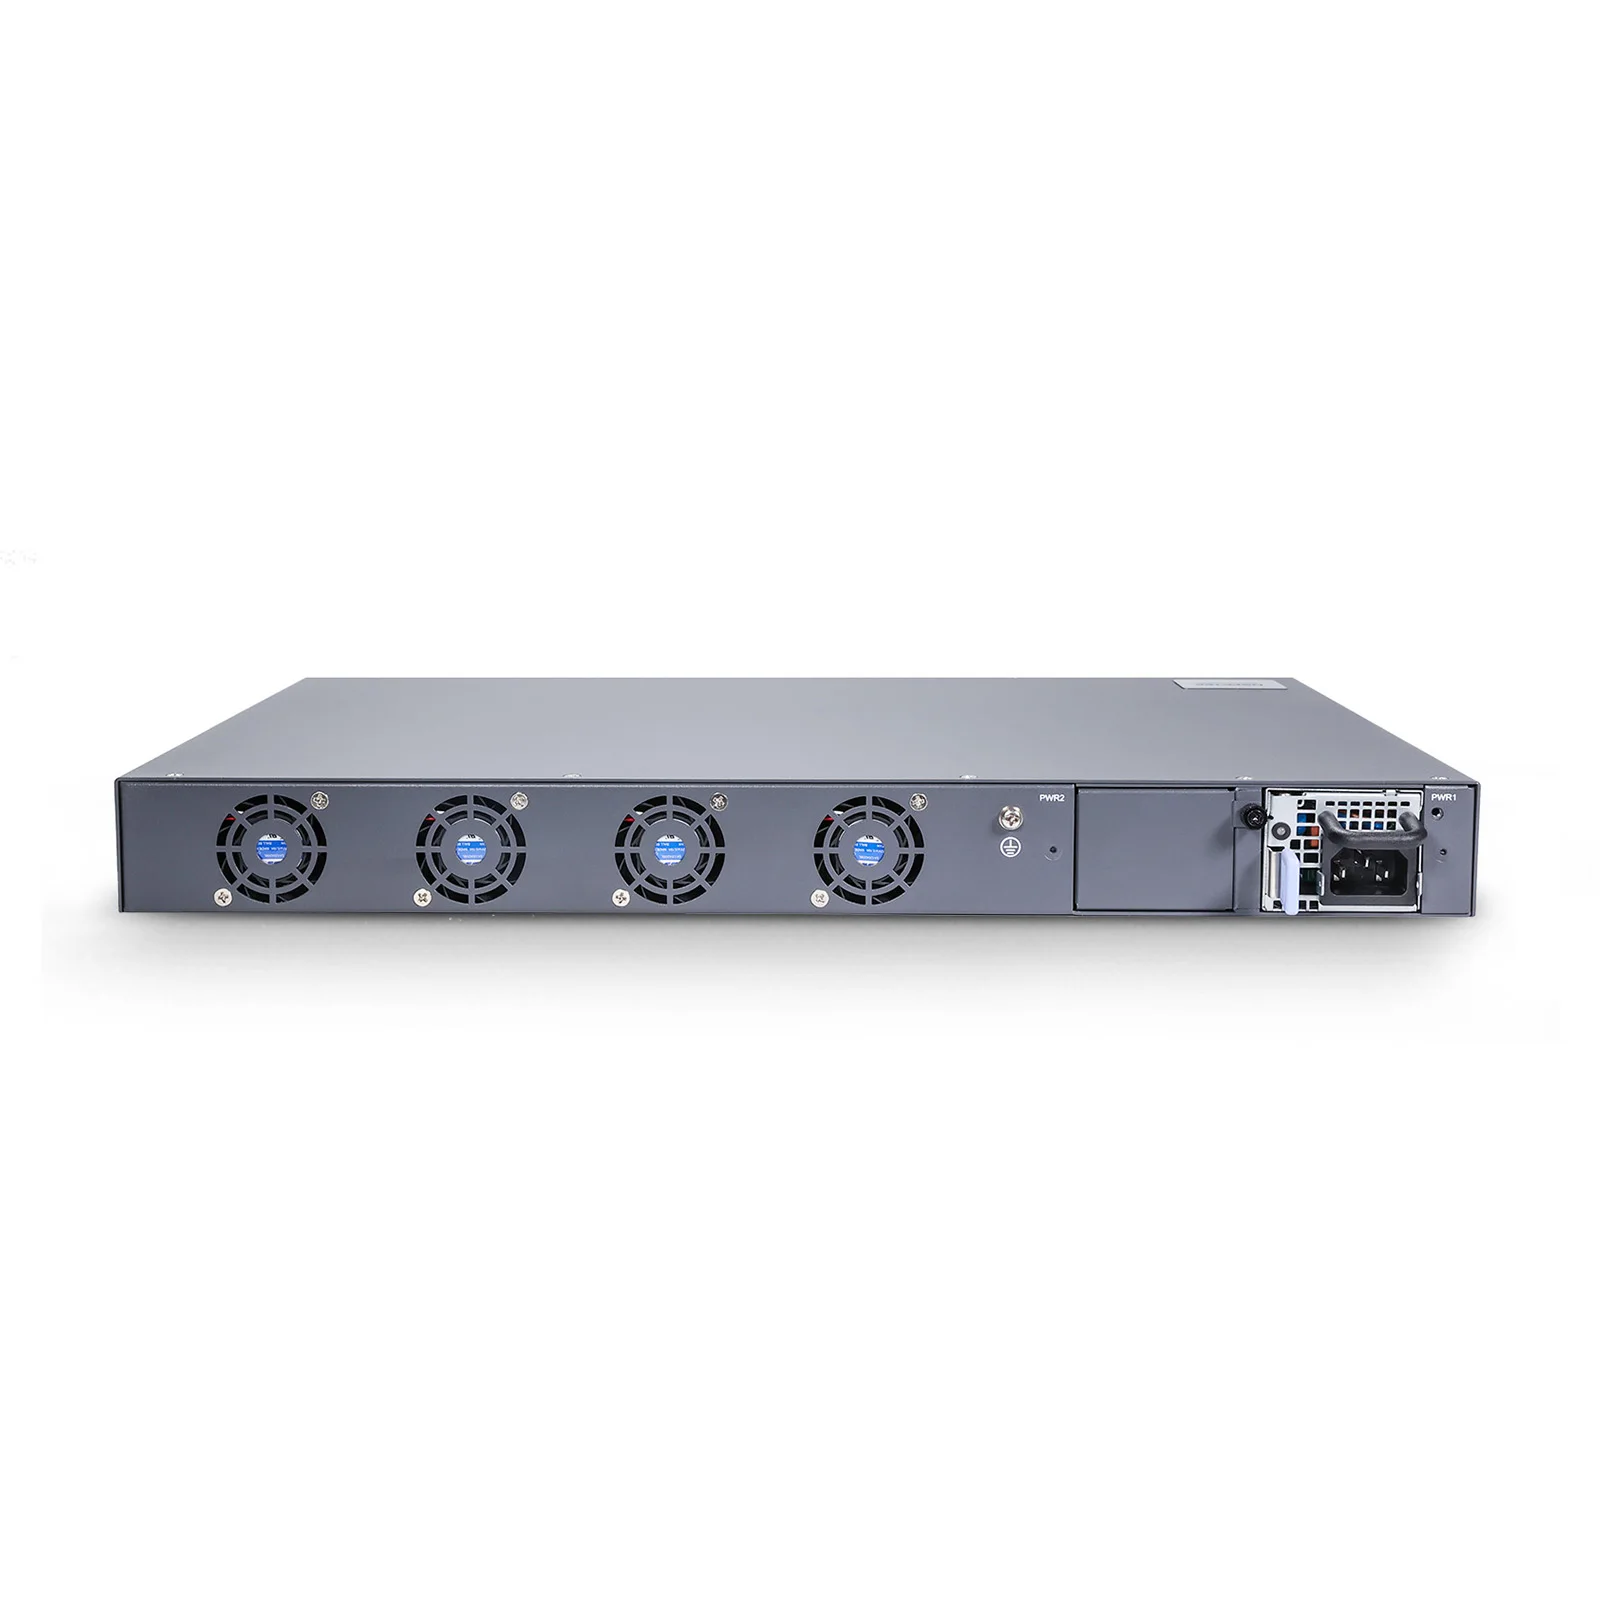 S5300-8TE4X-P, 8-Port Ethernet L2 Multi-Gigabit Active 802.3af/at/bt PoE  Switch for SMBs, 8 x 100/1000M/2.5GBASE-T PoE++ RJ45 Ports, with 4x 10G  SFP+